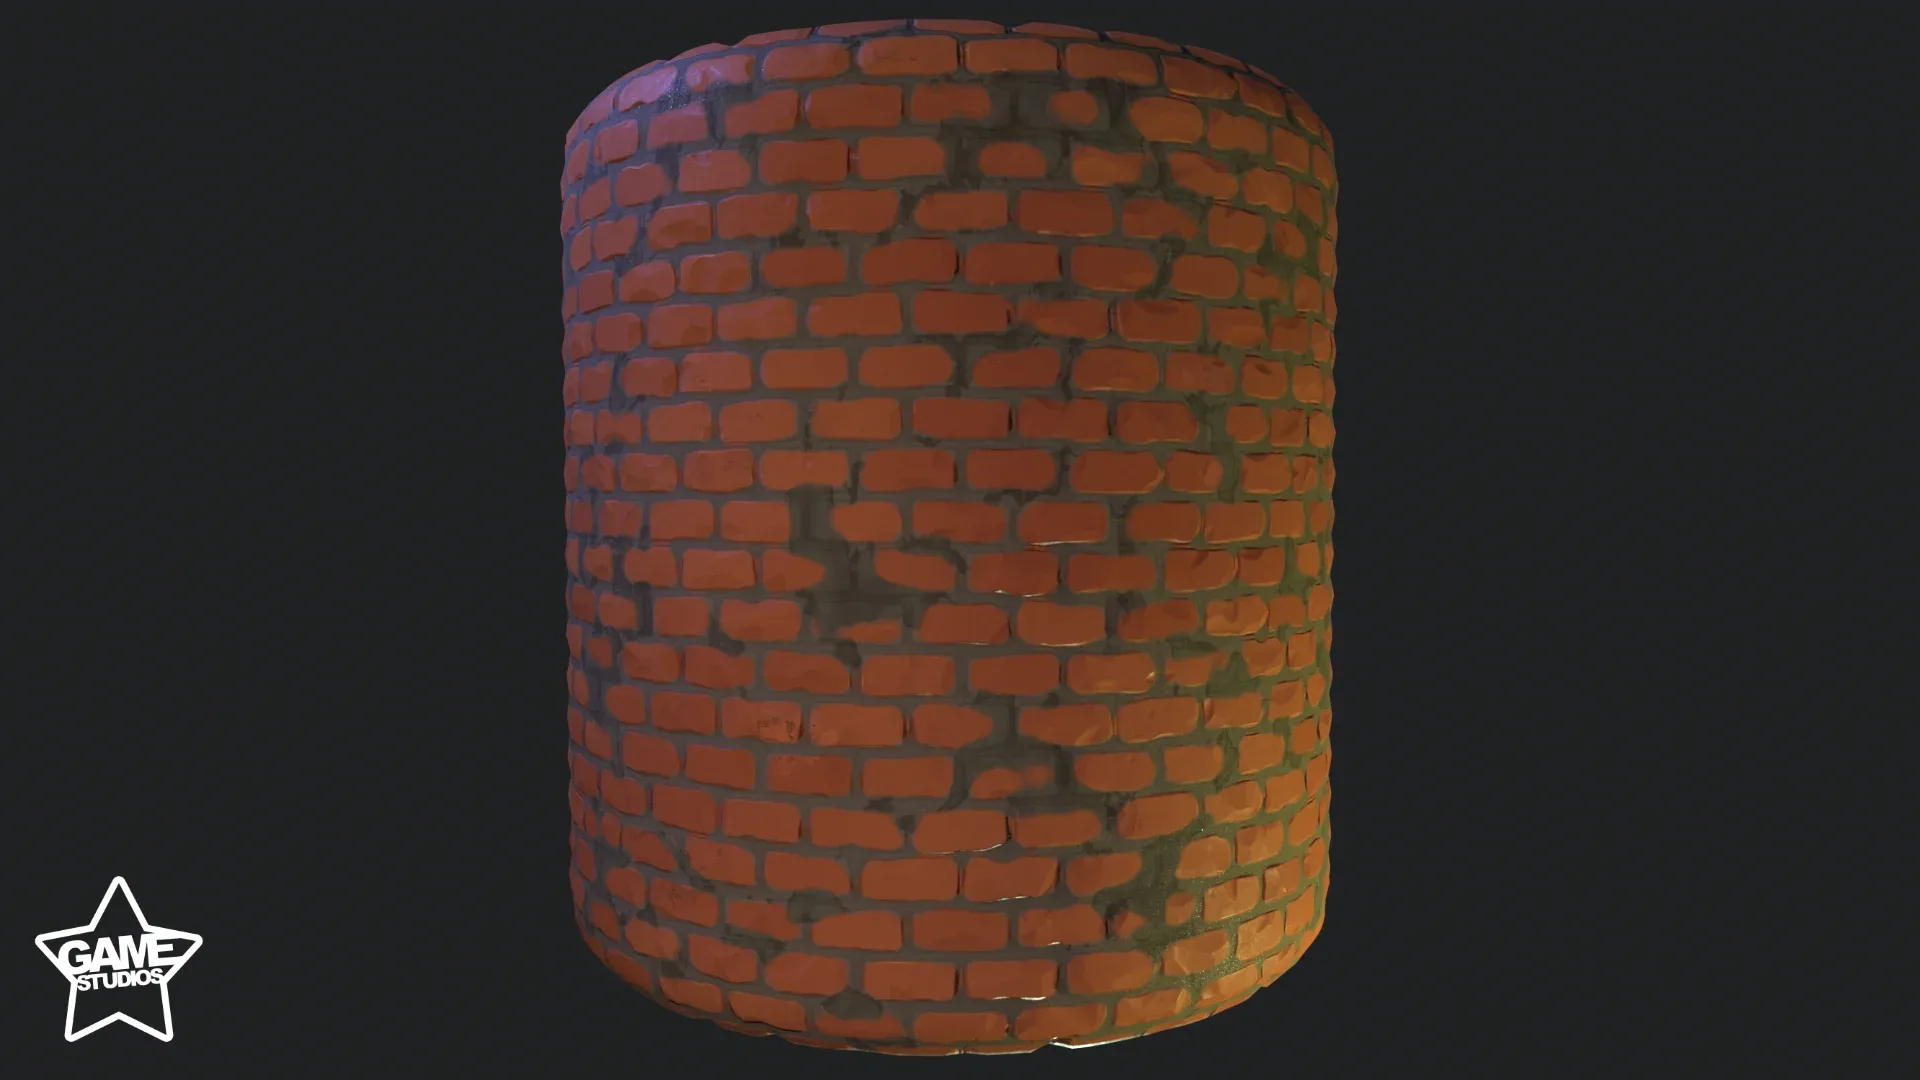 Stylized Brick Wall Material 01 - Substance 3D Designer